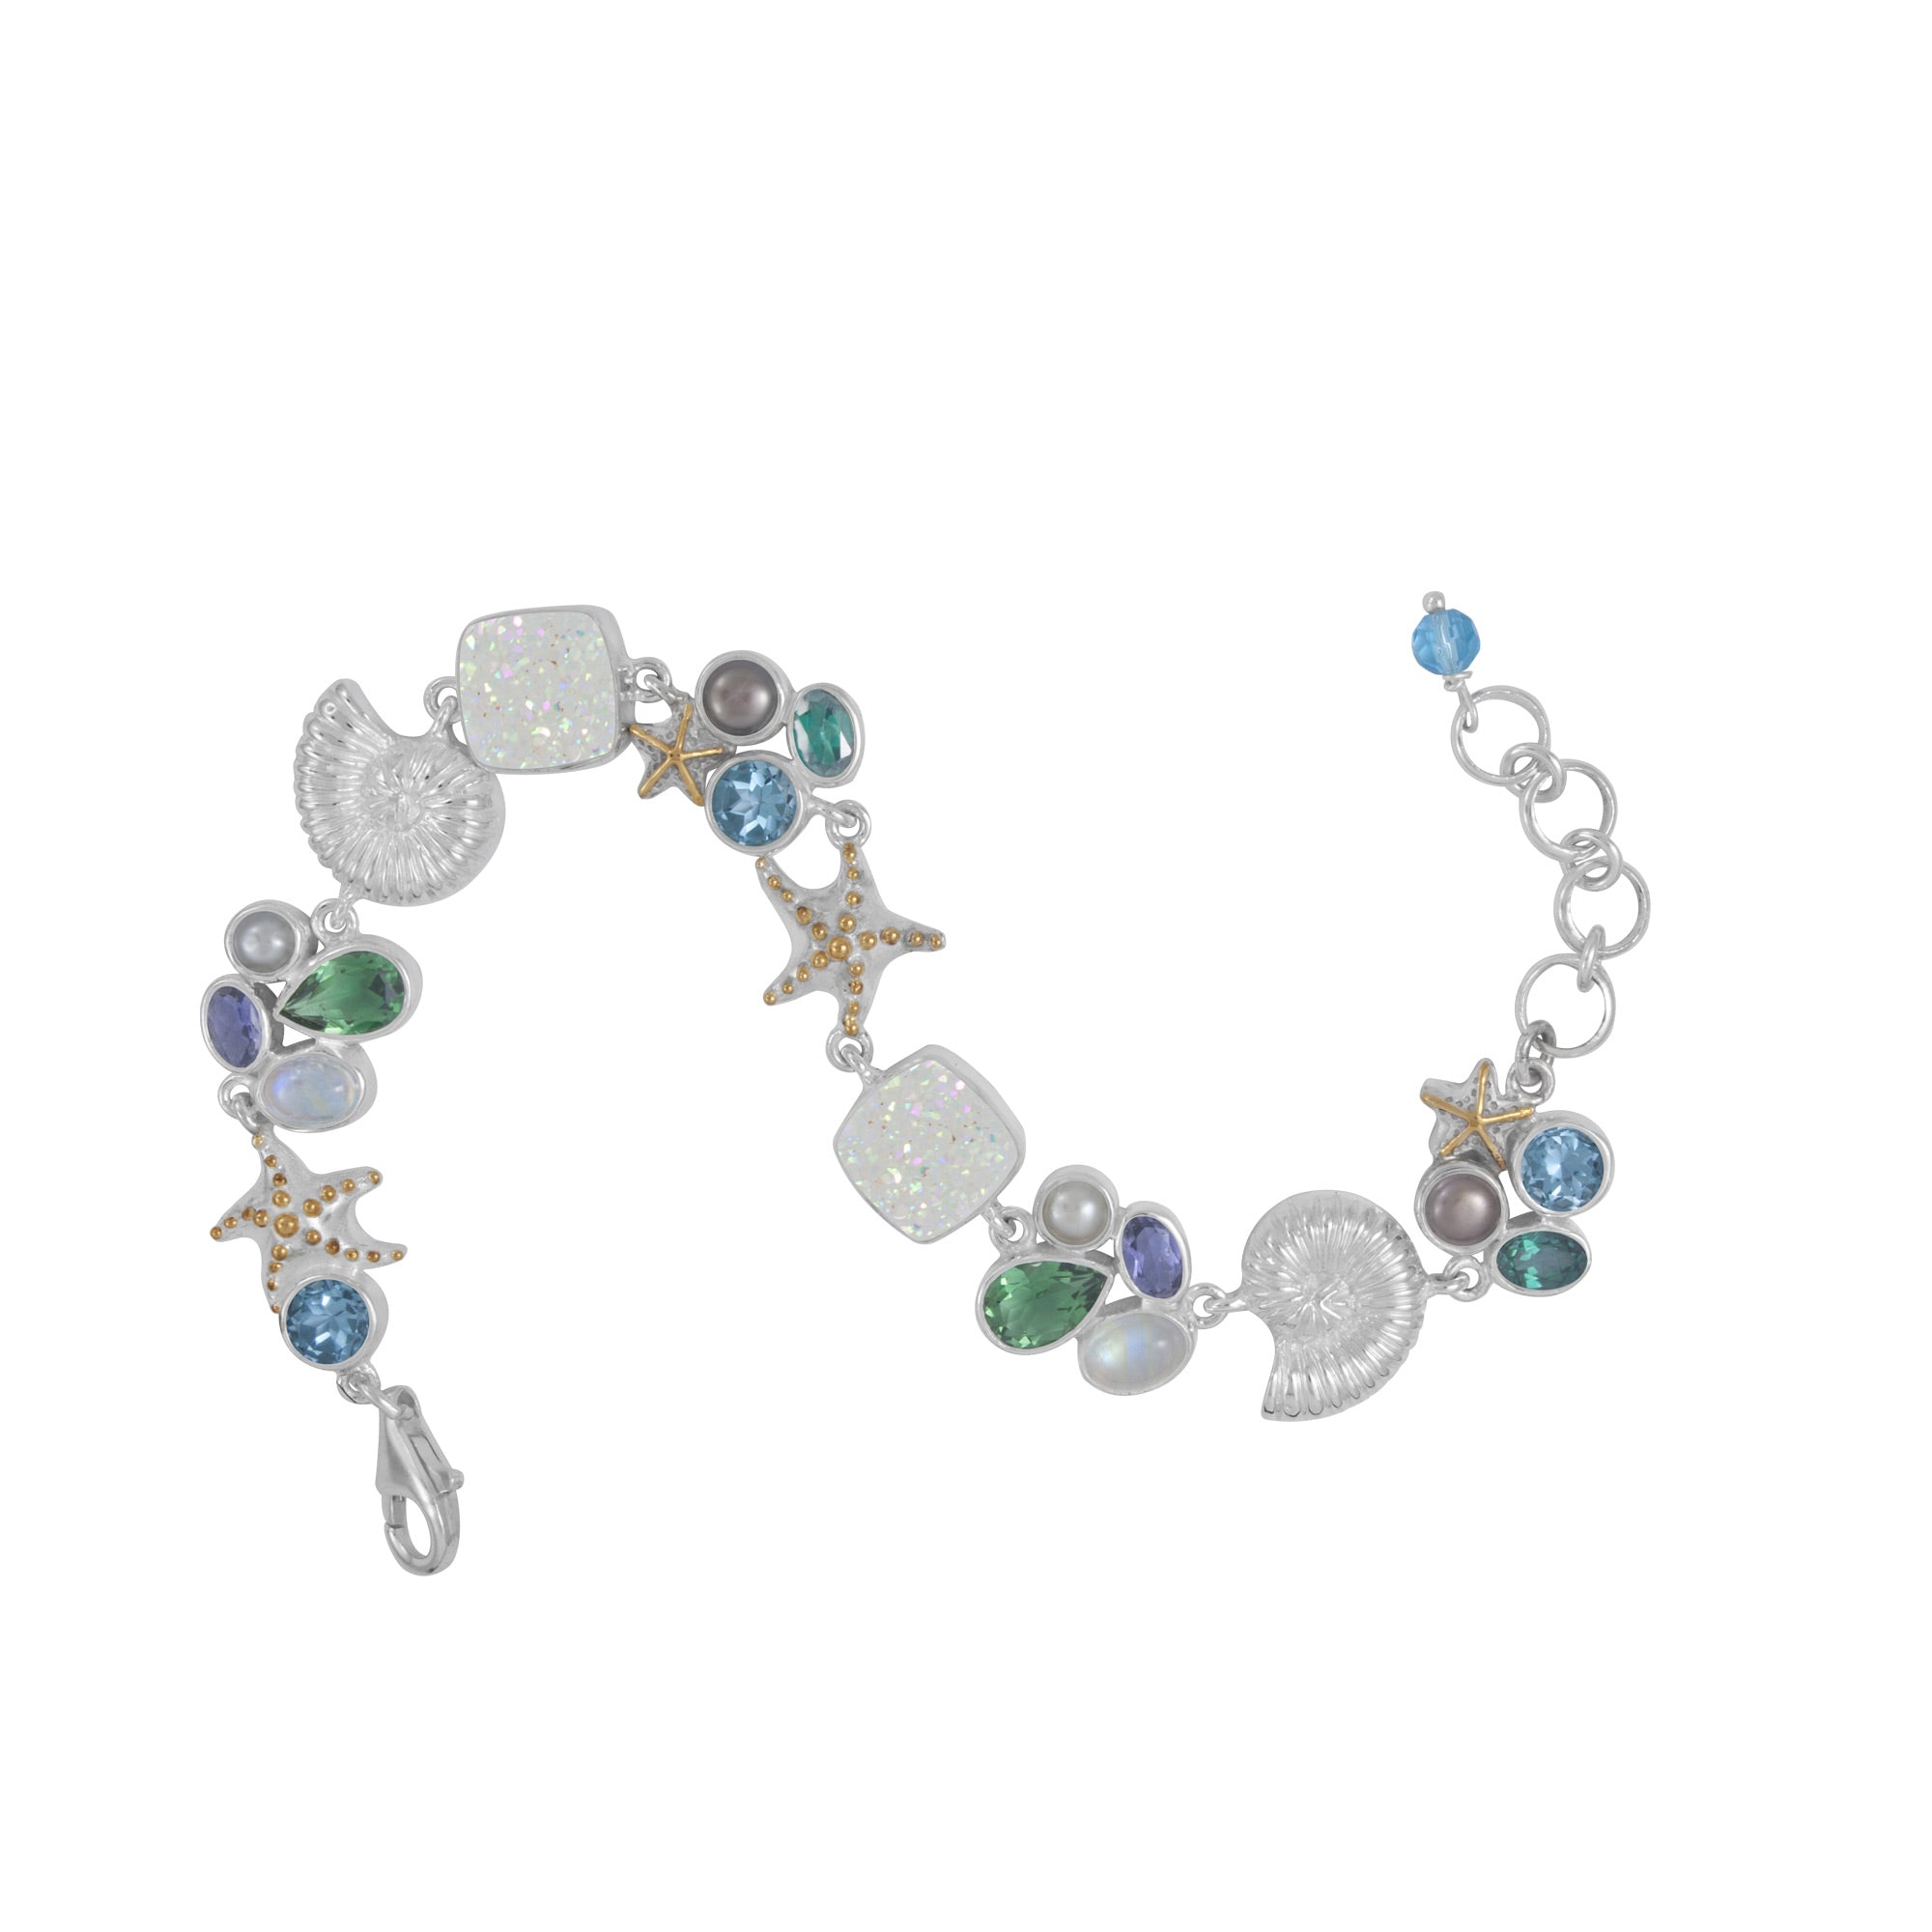 Silver Bracelet With Sea Shell Component And Multi Stone